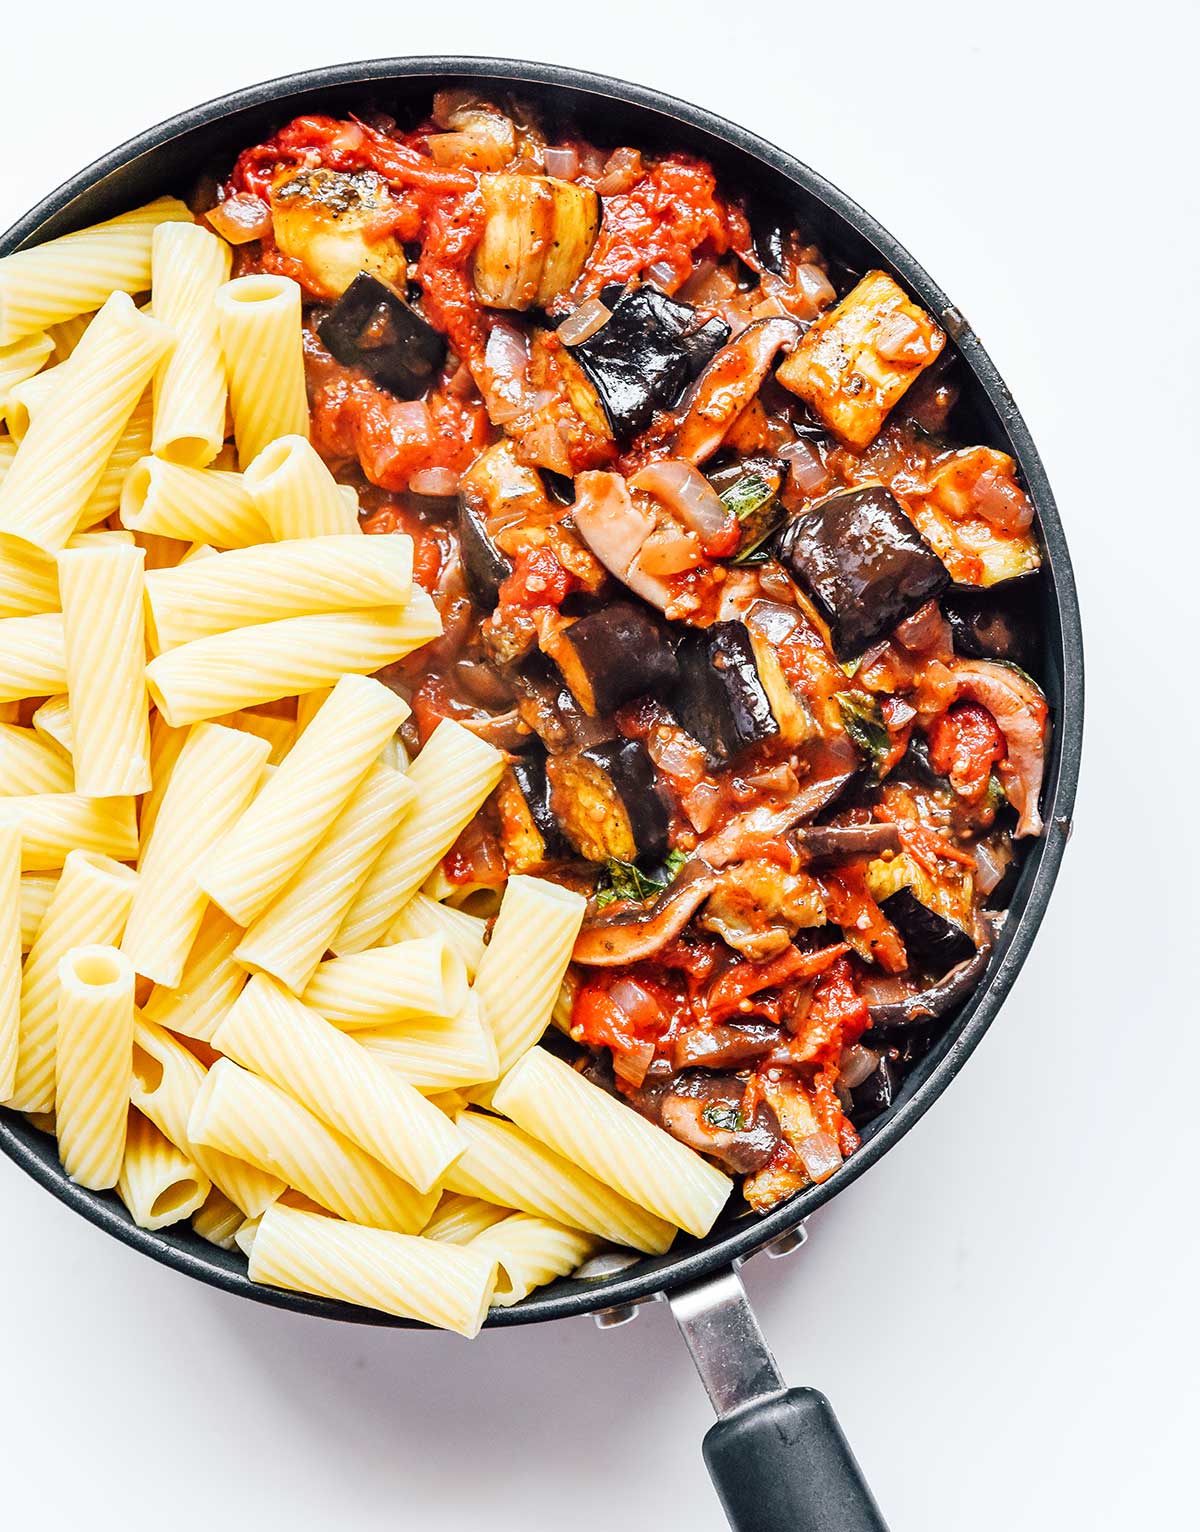 A skillet filled with vegetable bolognese sauce and rigatoni noodles